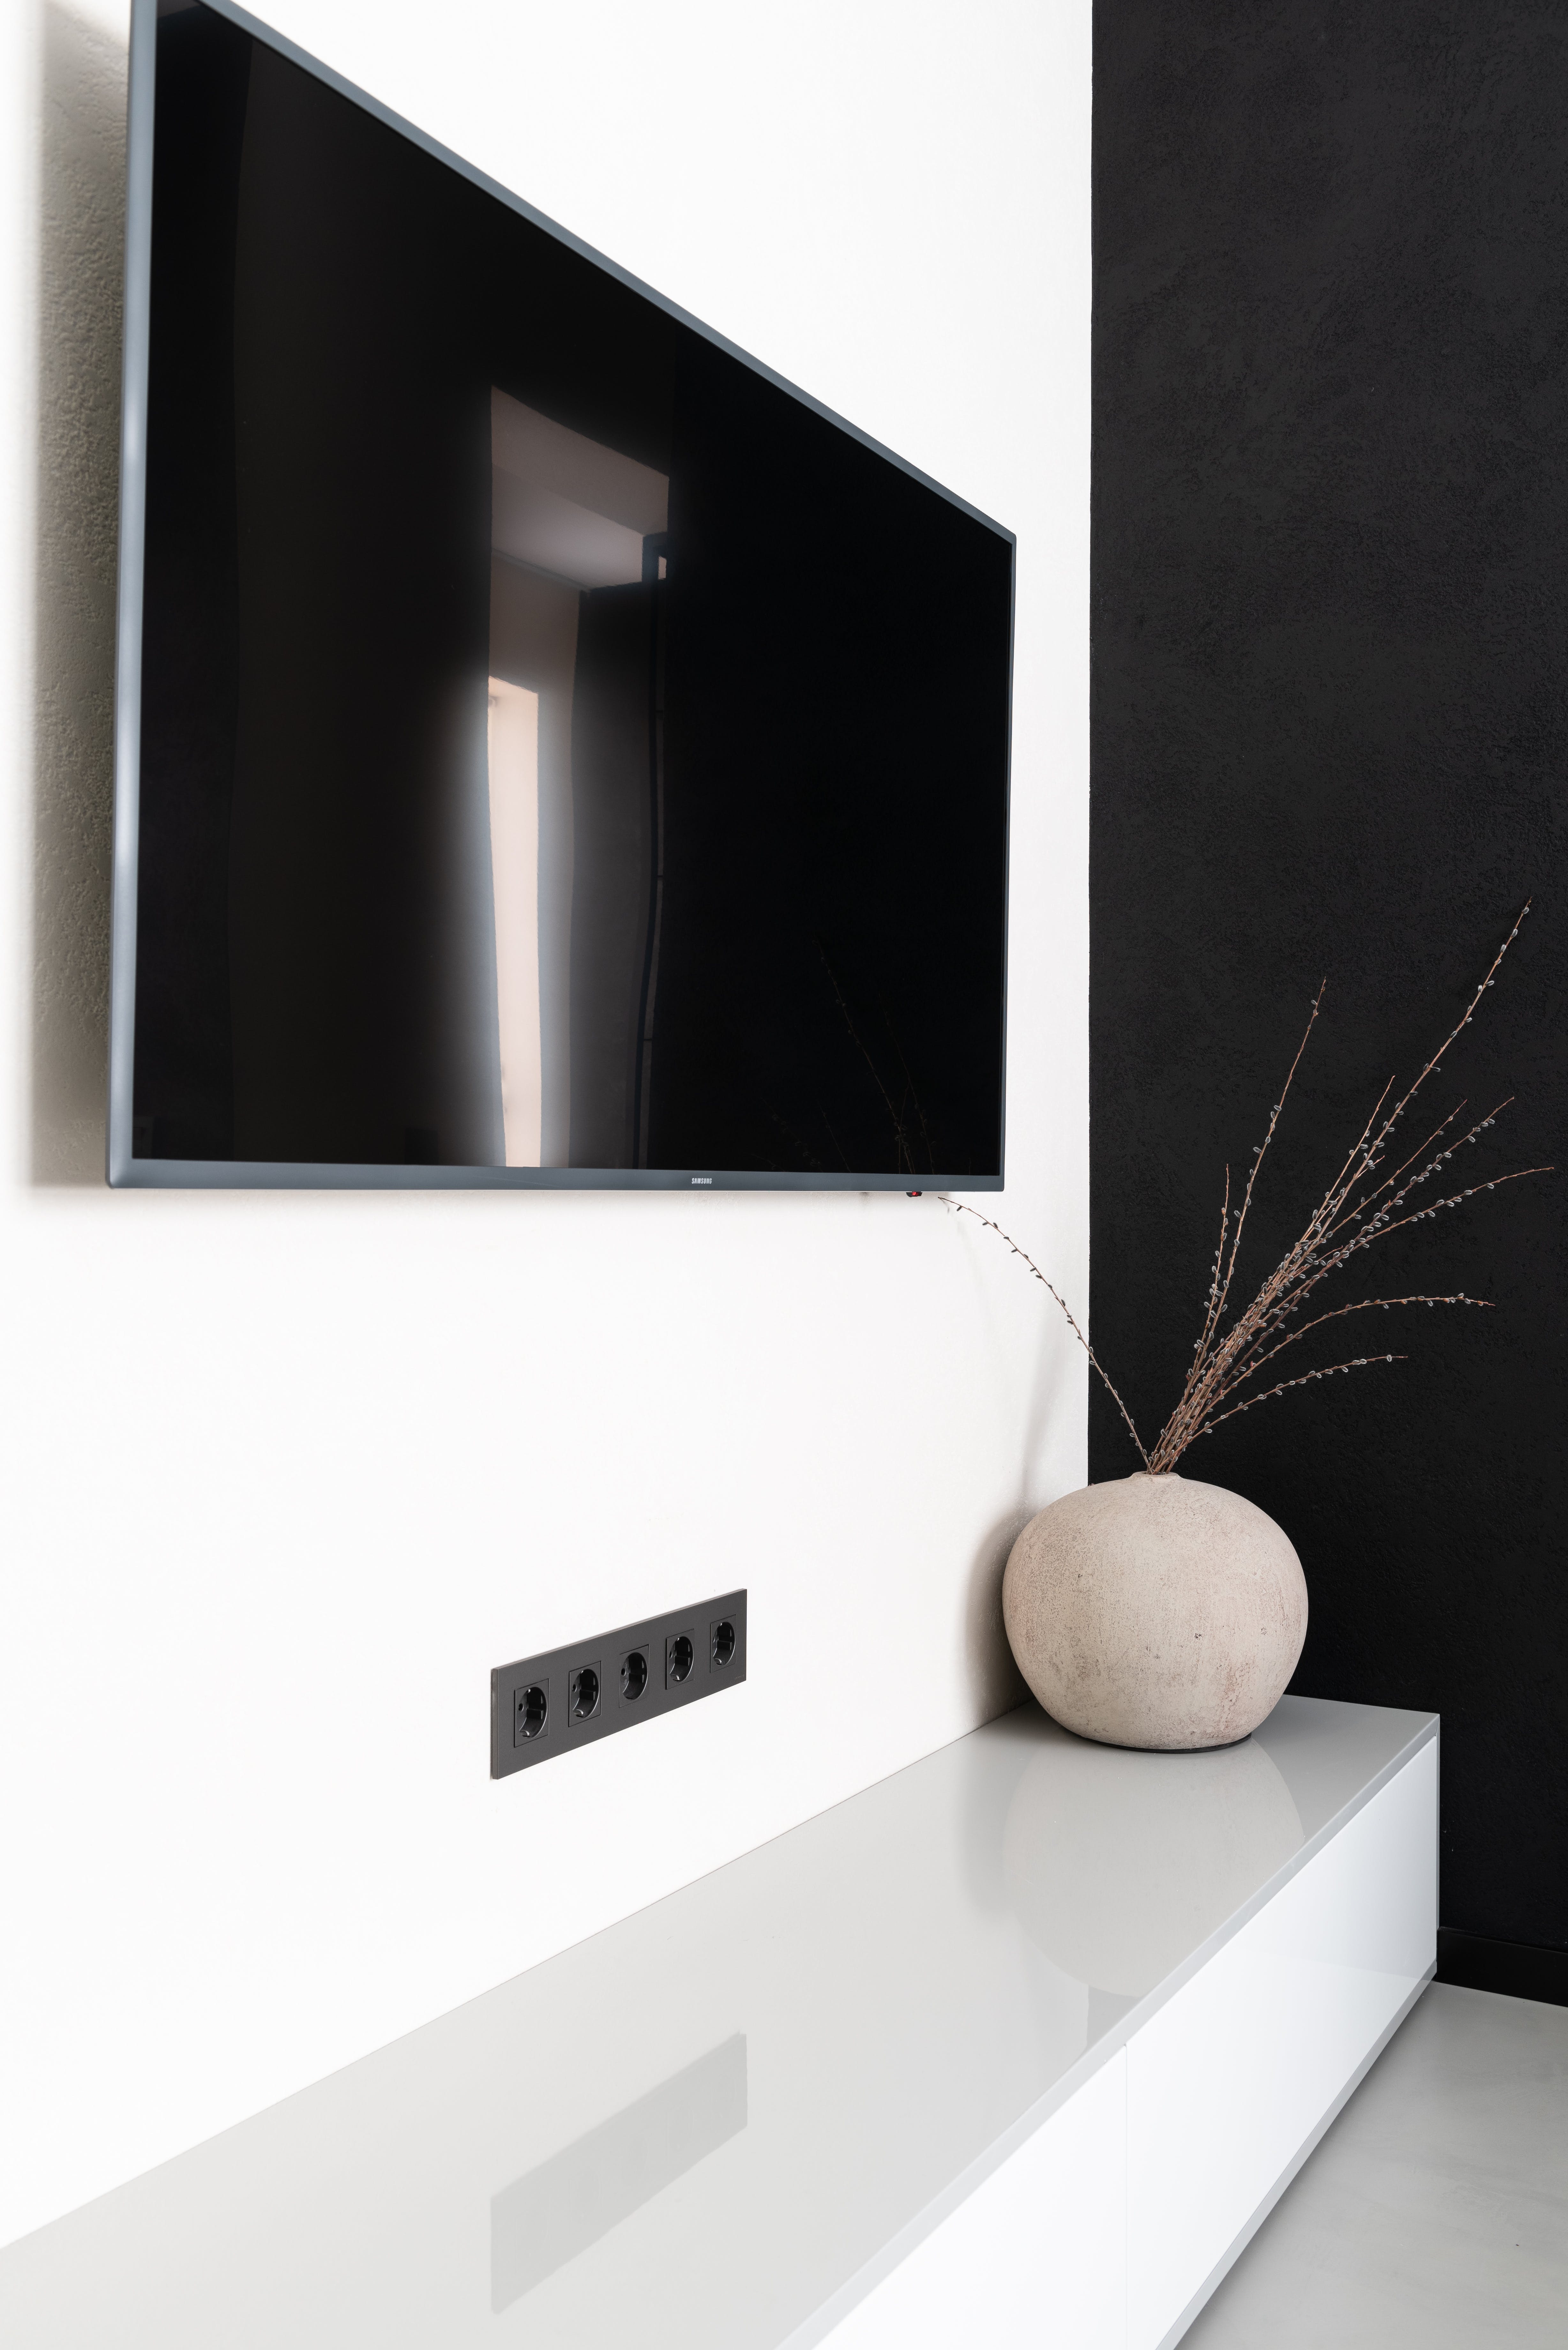 A flat screen TV mounted on a wall. | Source: Pexels